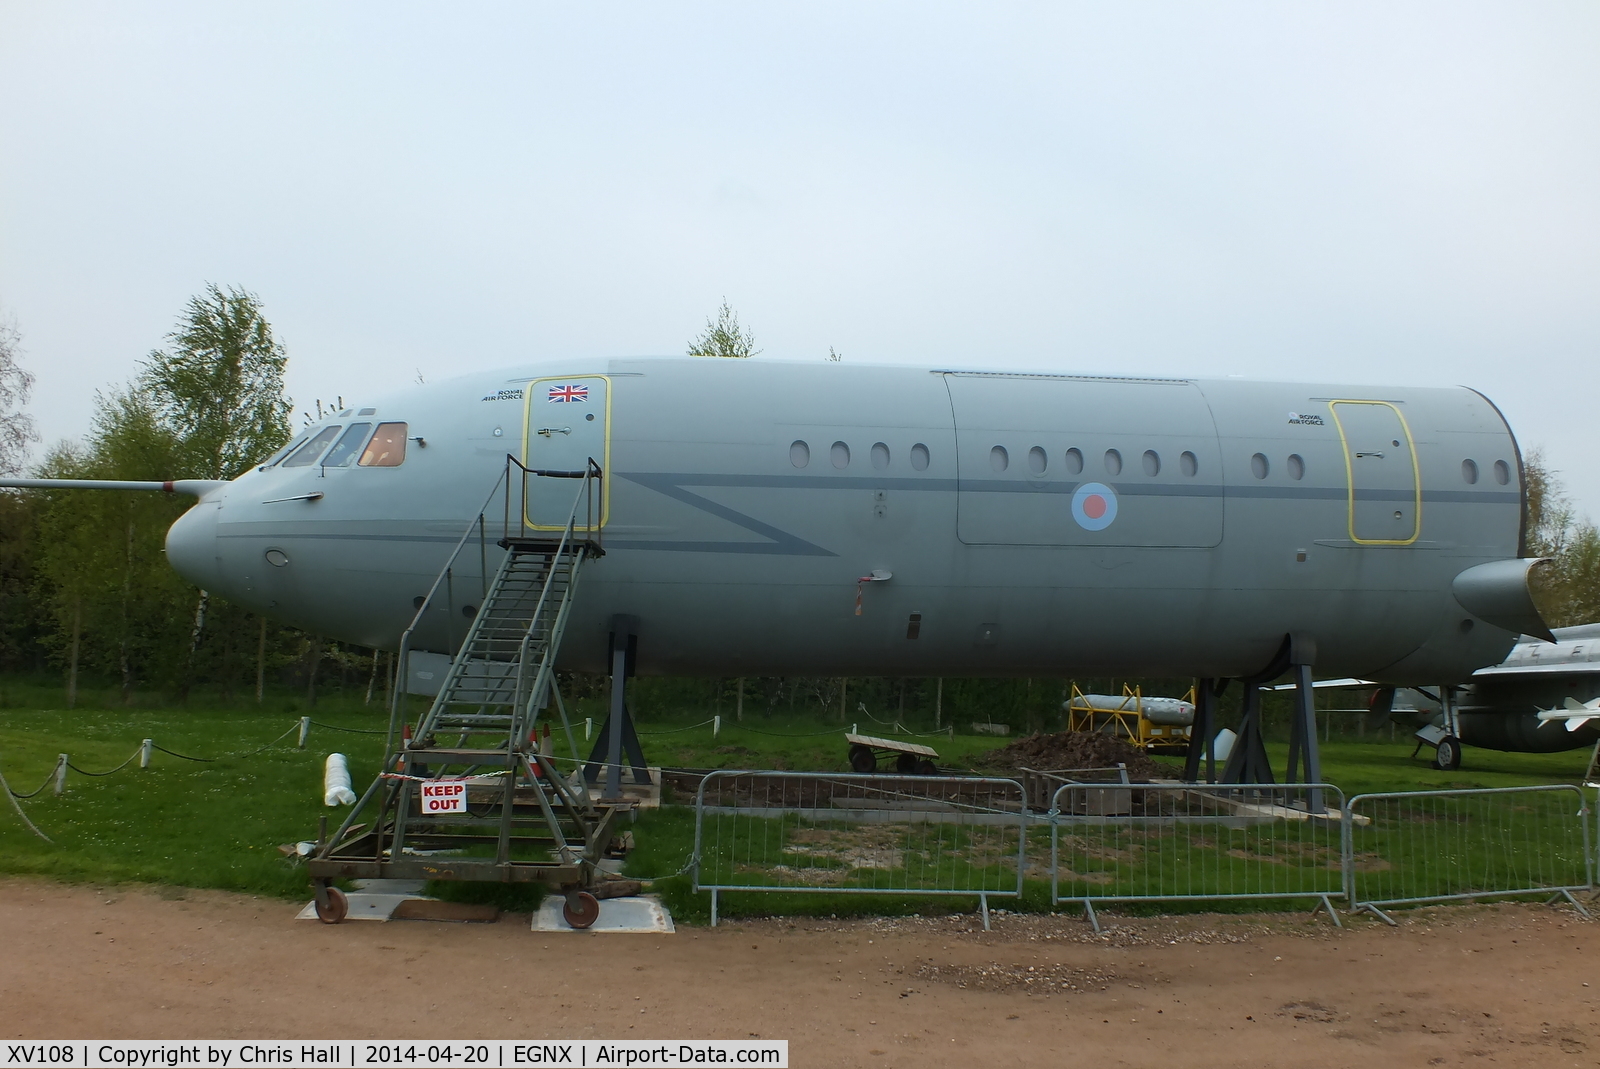 XV108, 1968 Vickers VC10 C.1K C/N 838, latest addition at the East Midlands Aeropark